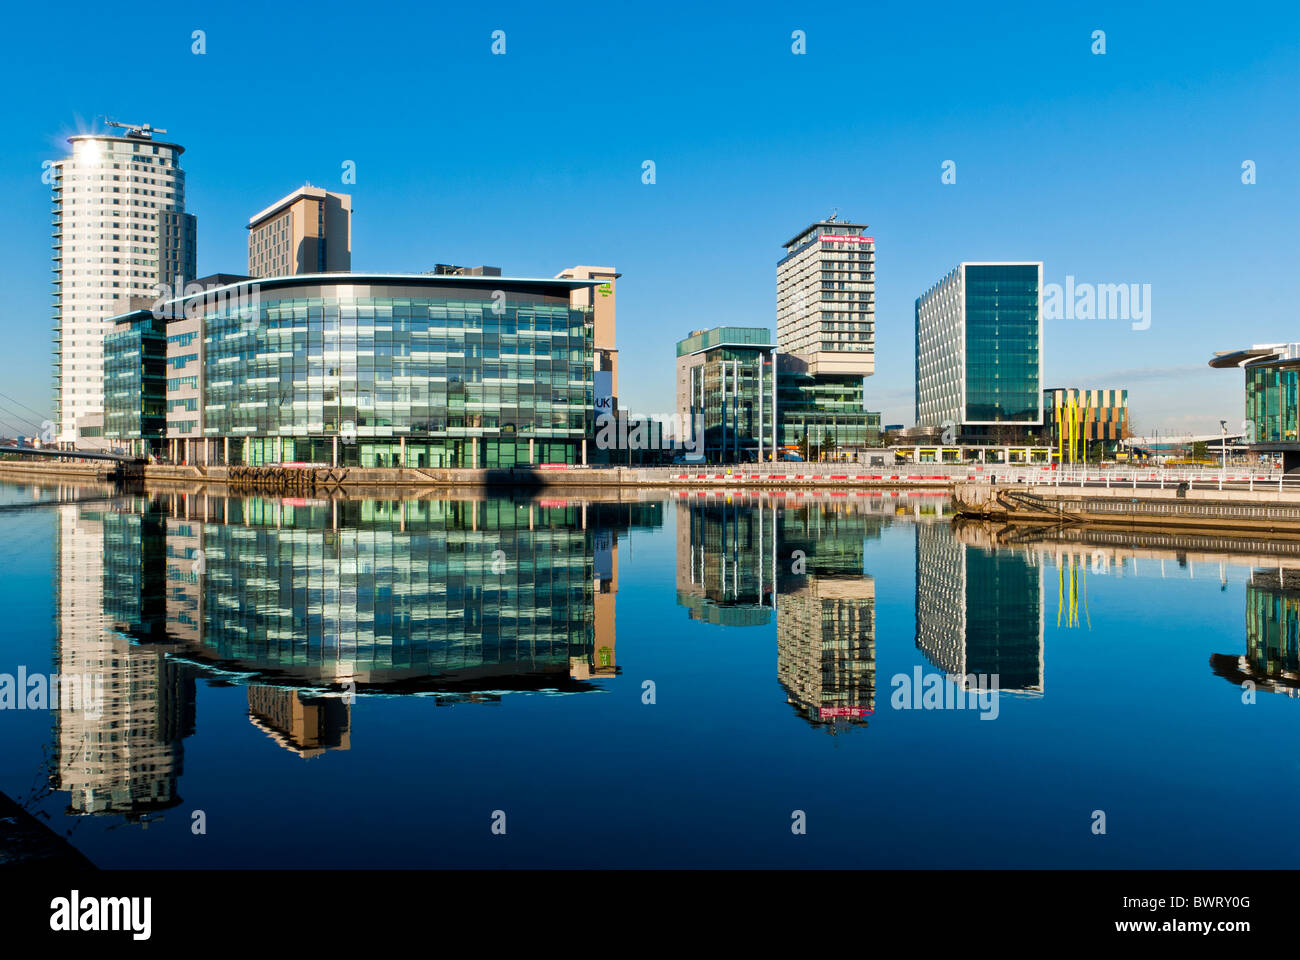 BBC Media City at Salford Quays reflected in docks, Manchester, England, UK Stock Photo